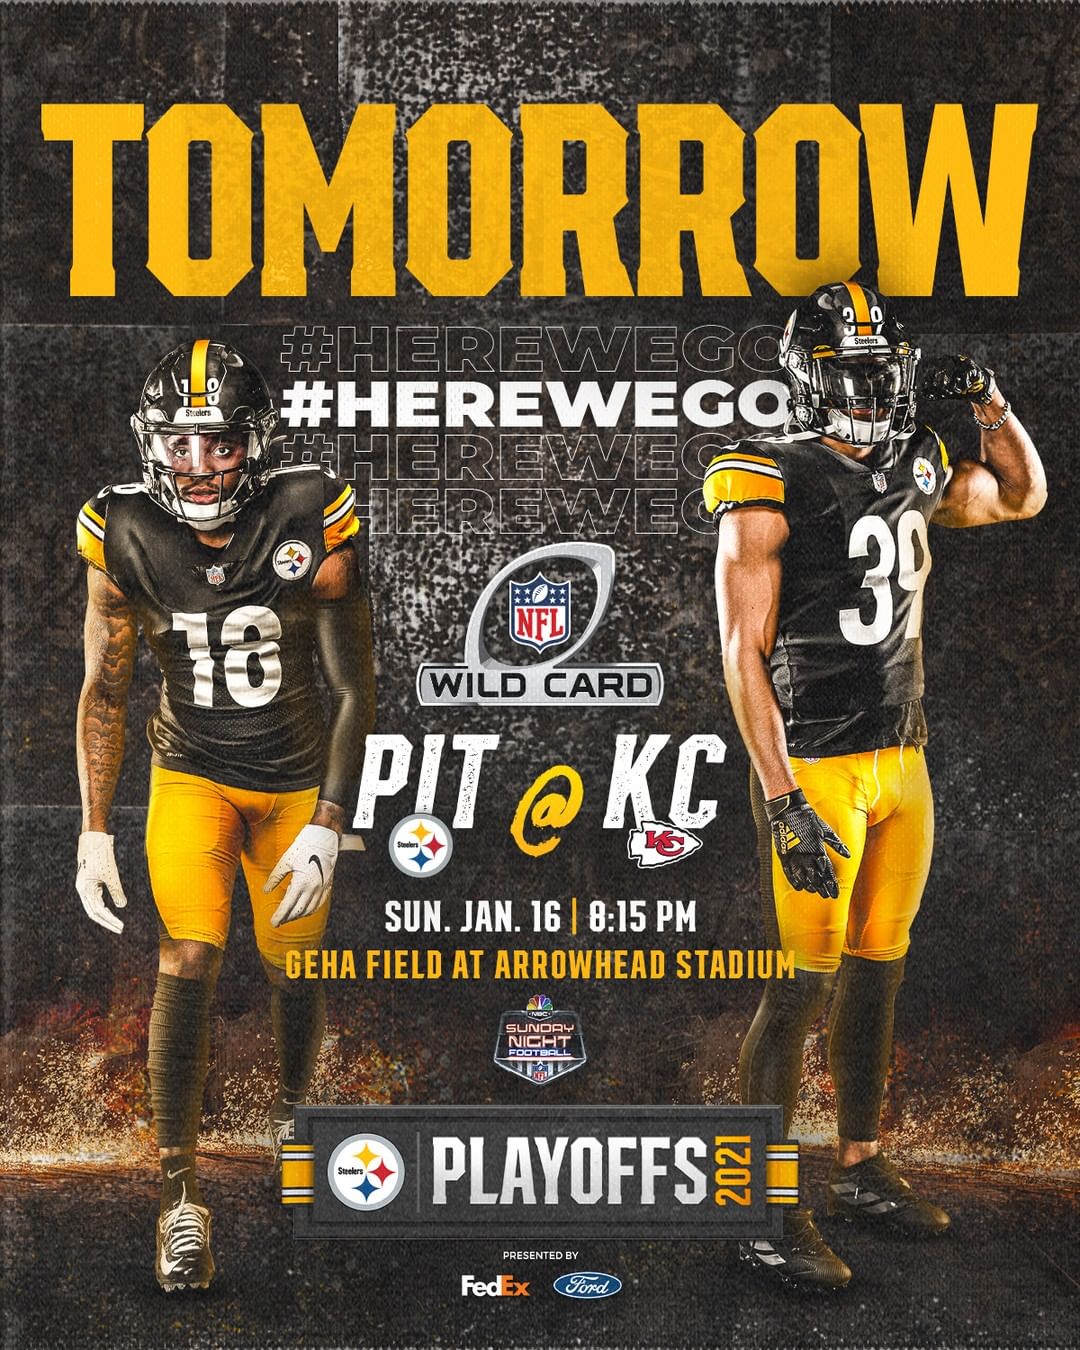 Can't come soon enough. #HereWeGo...